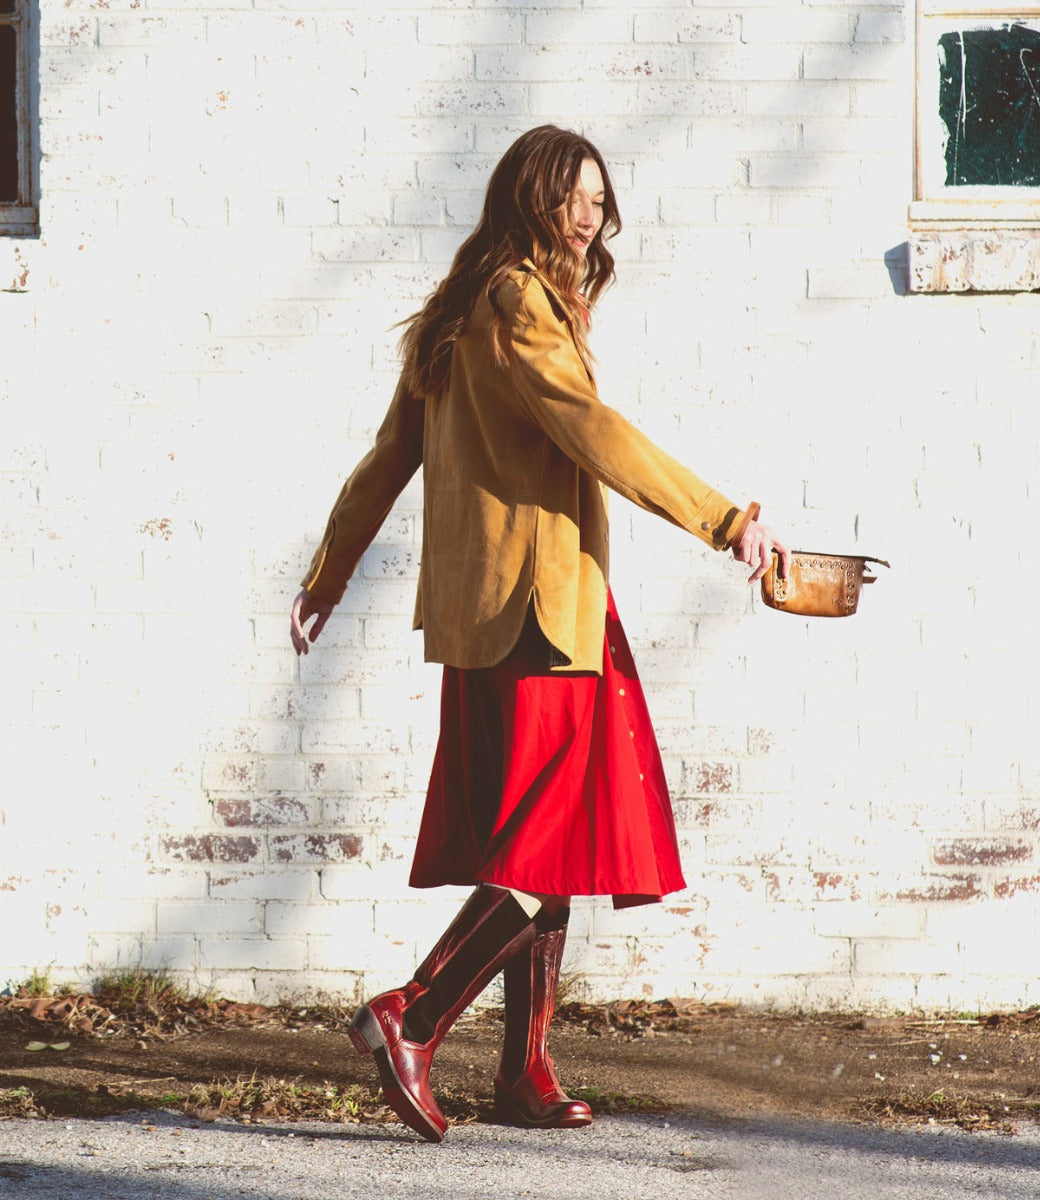 A woman in a red dress walking with a Clarisse boots from the brand Bed Stu.